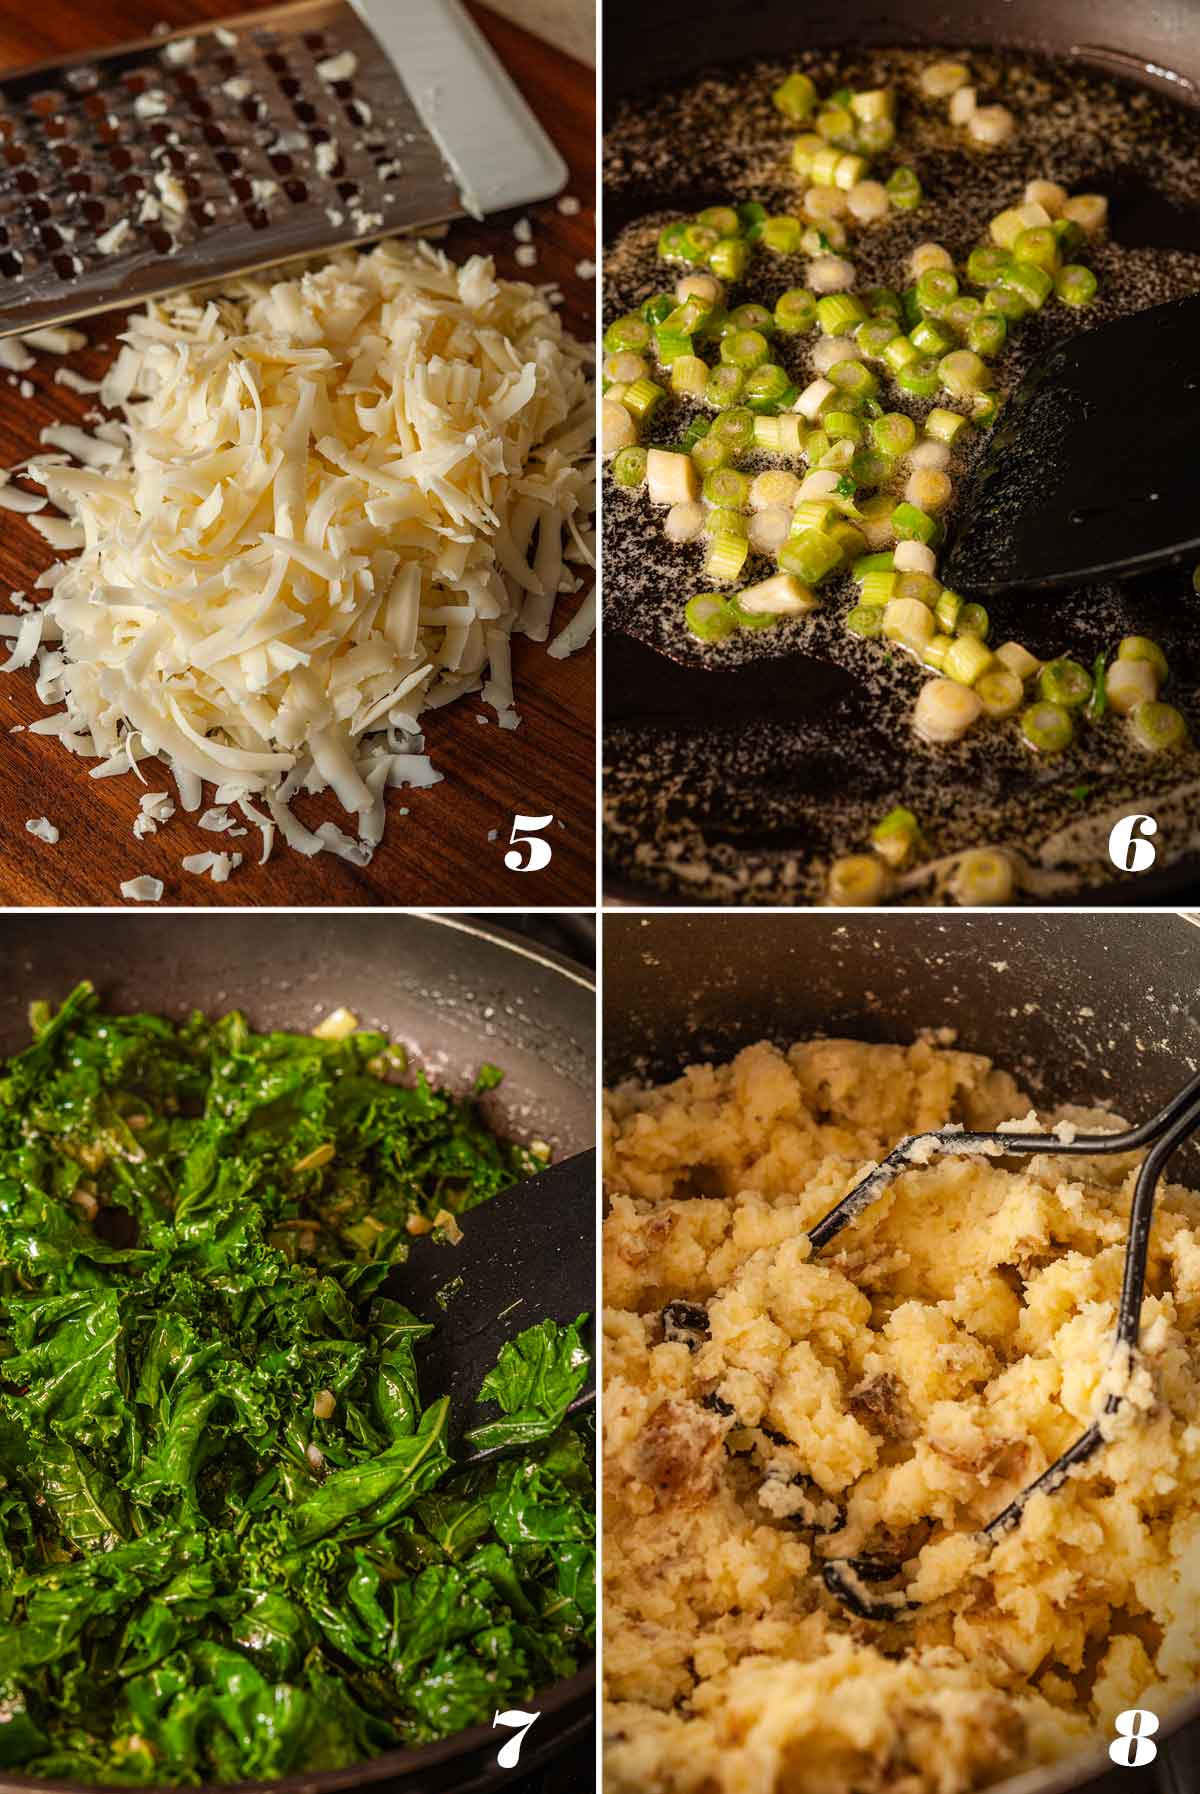 A collage of 4 numbered images showing how to prep ingredients and mash potatoes.